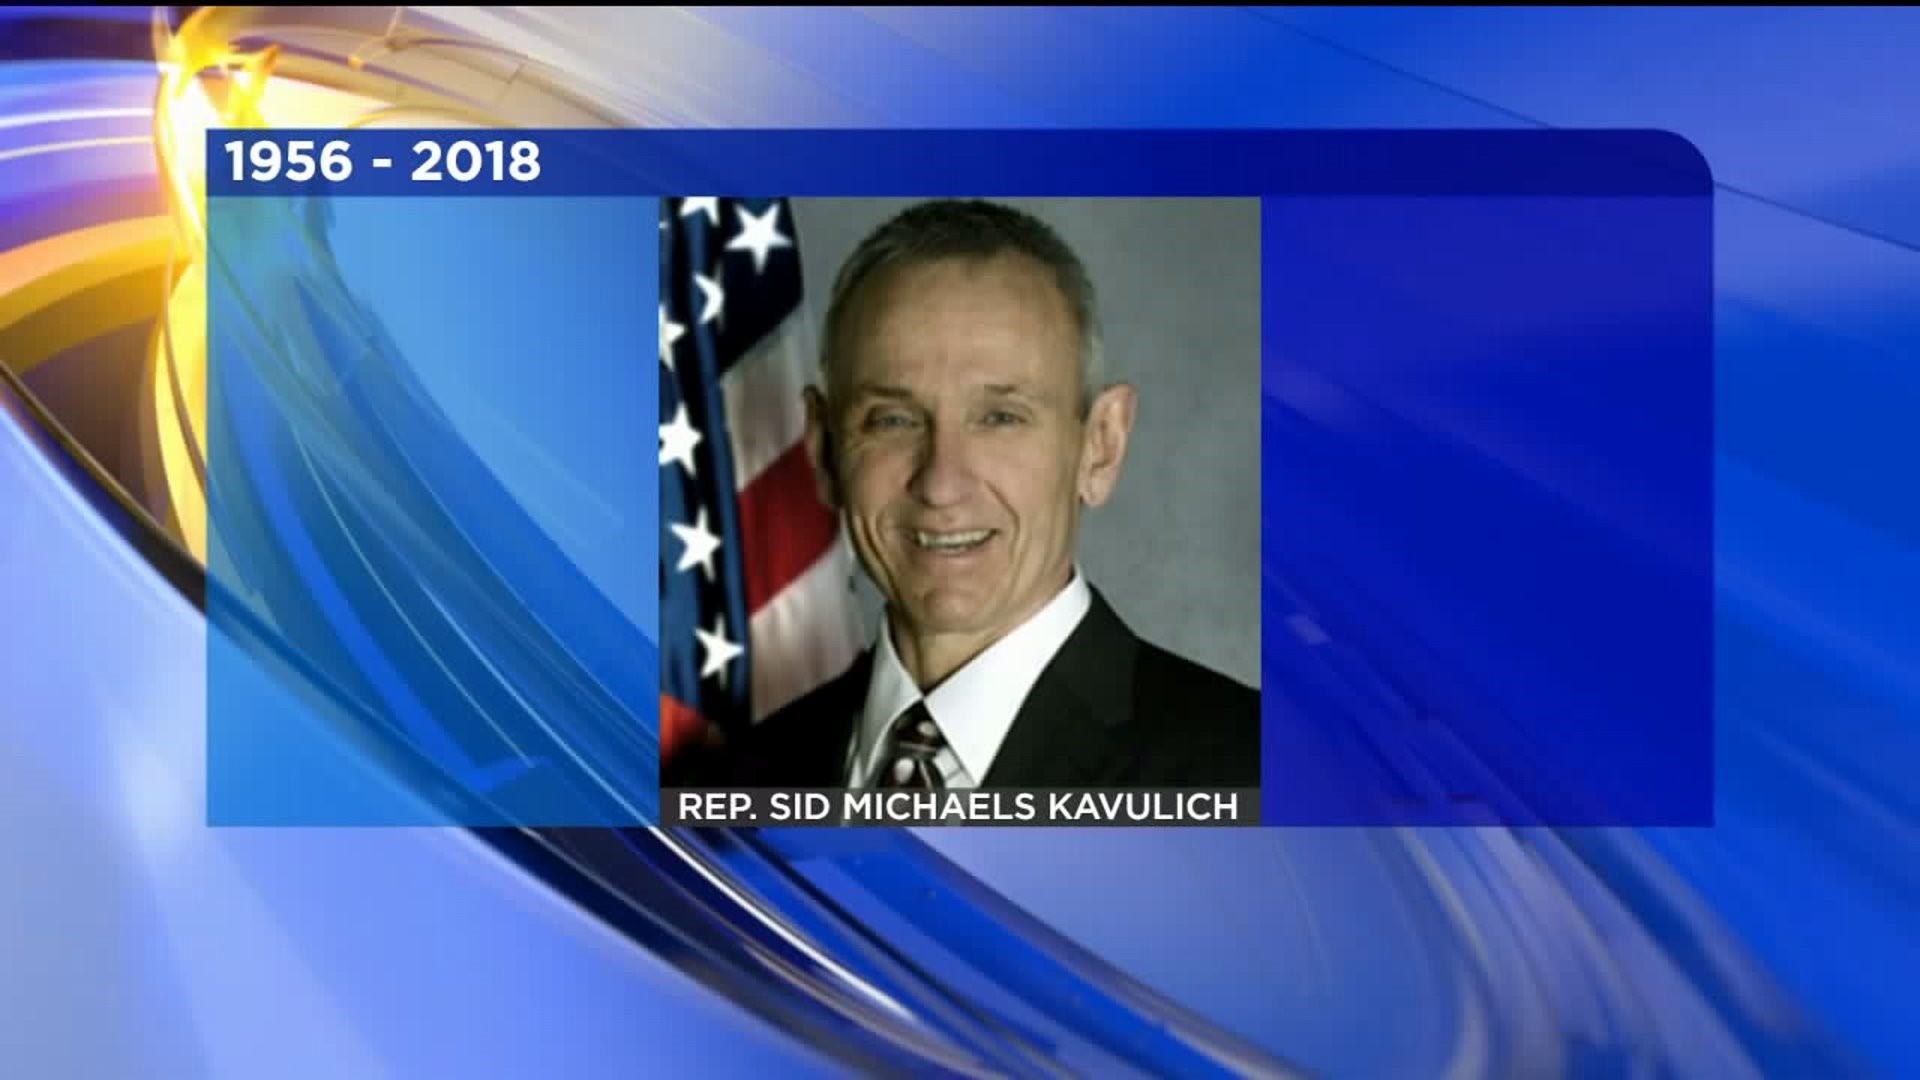 Rep. Sid Michaels Kavulich Passes Away at 62